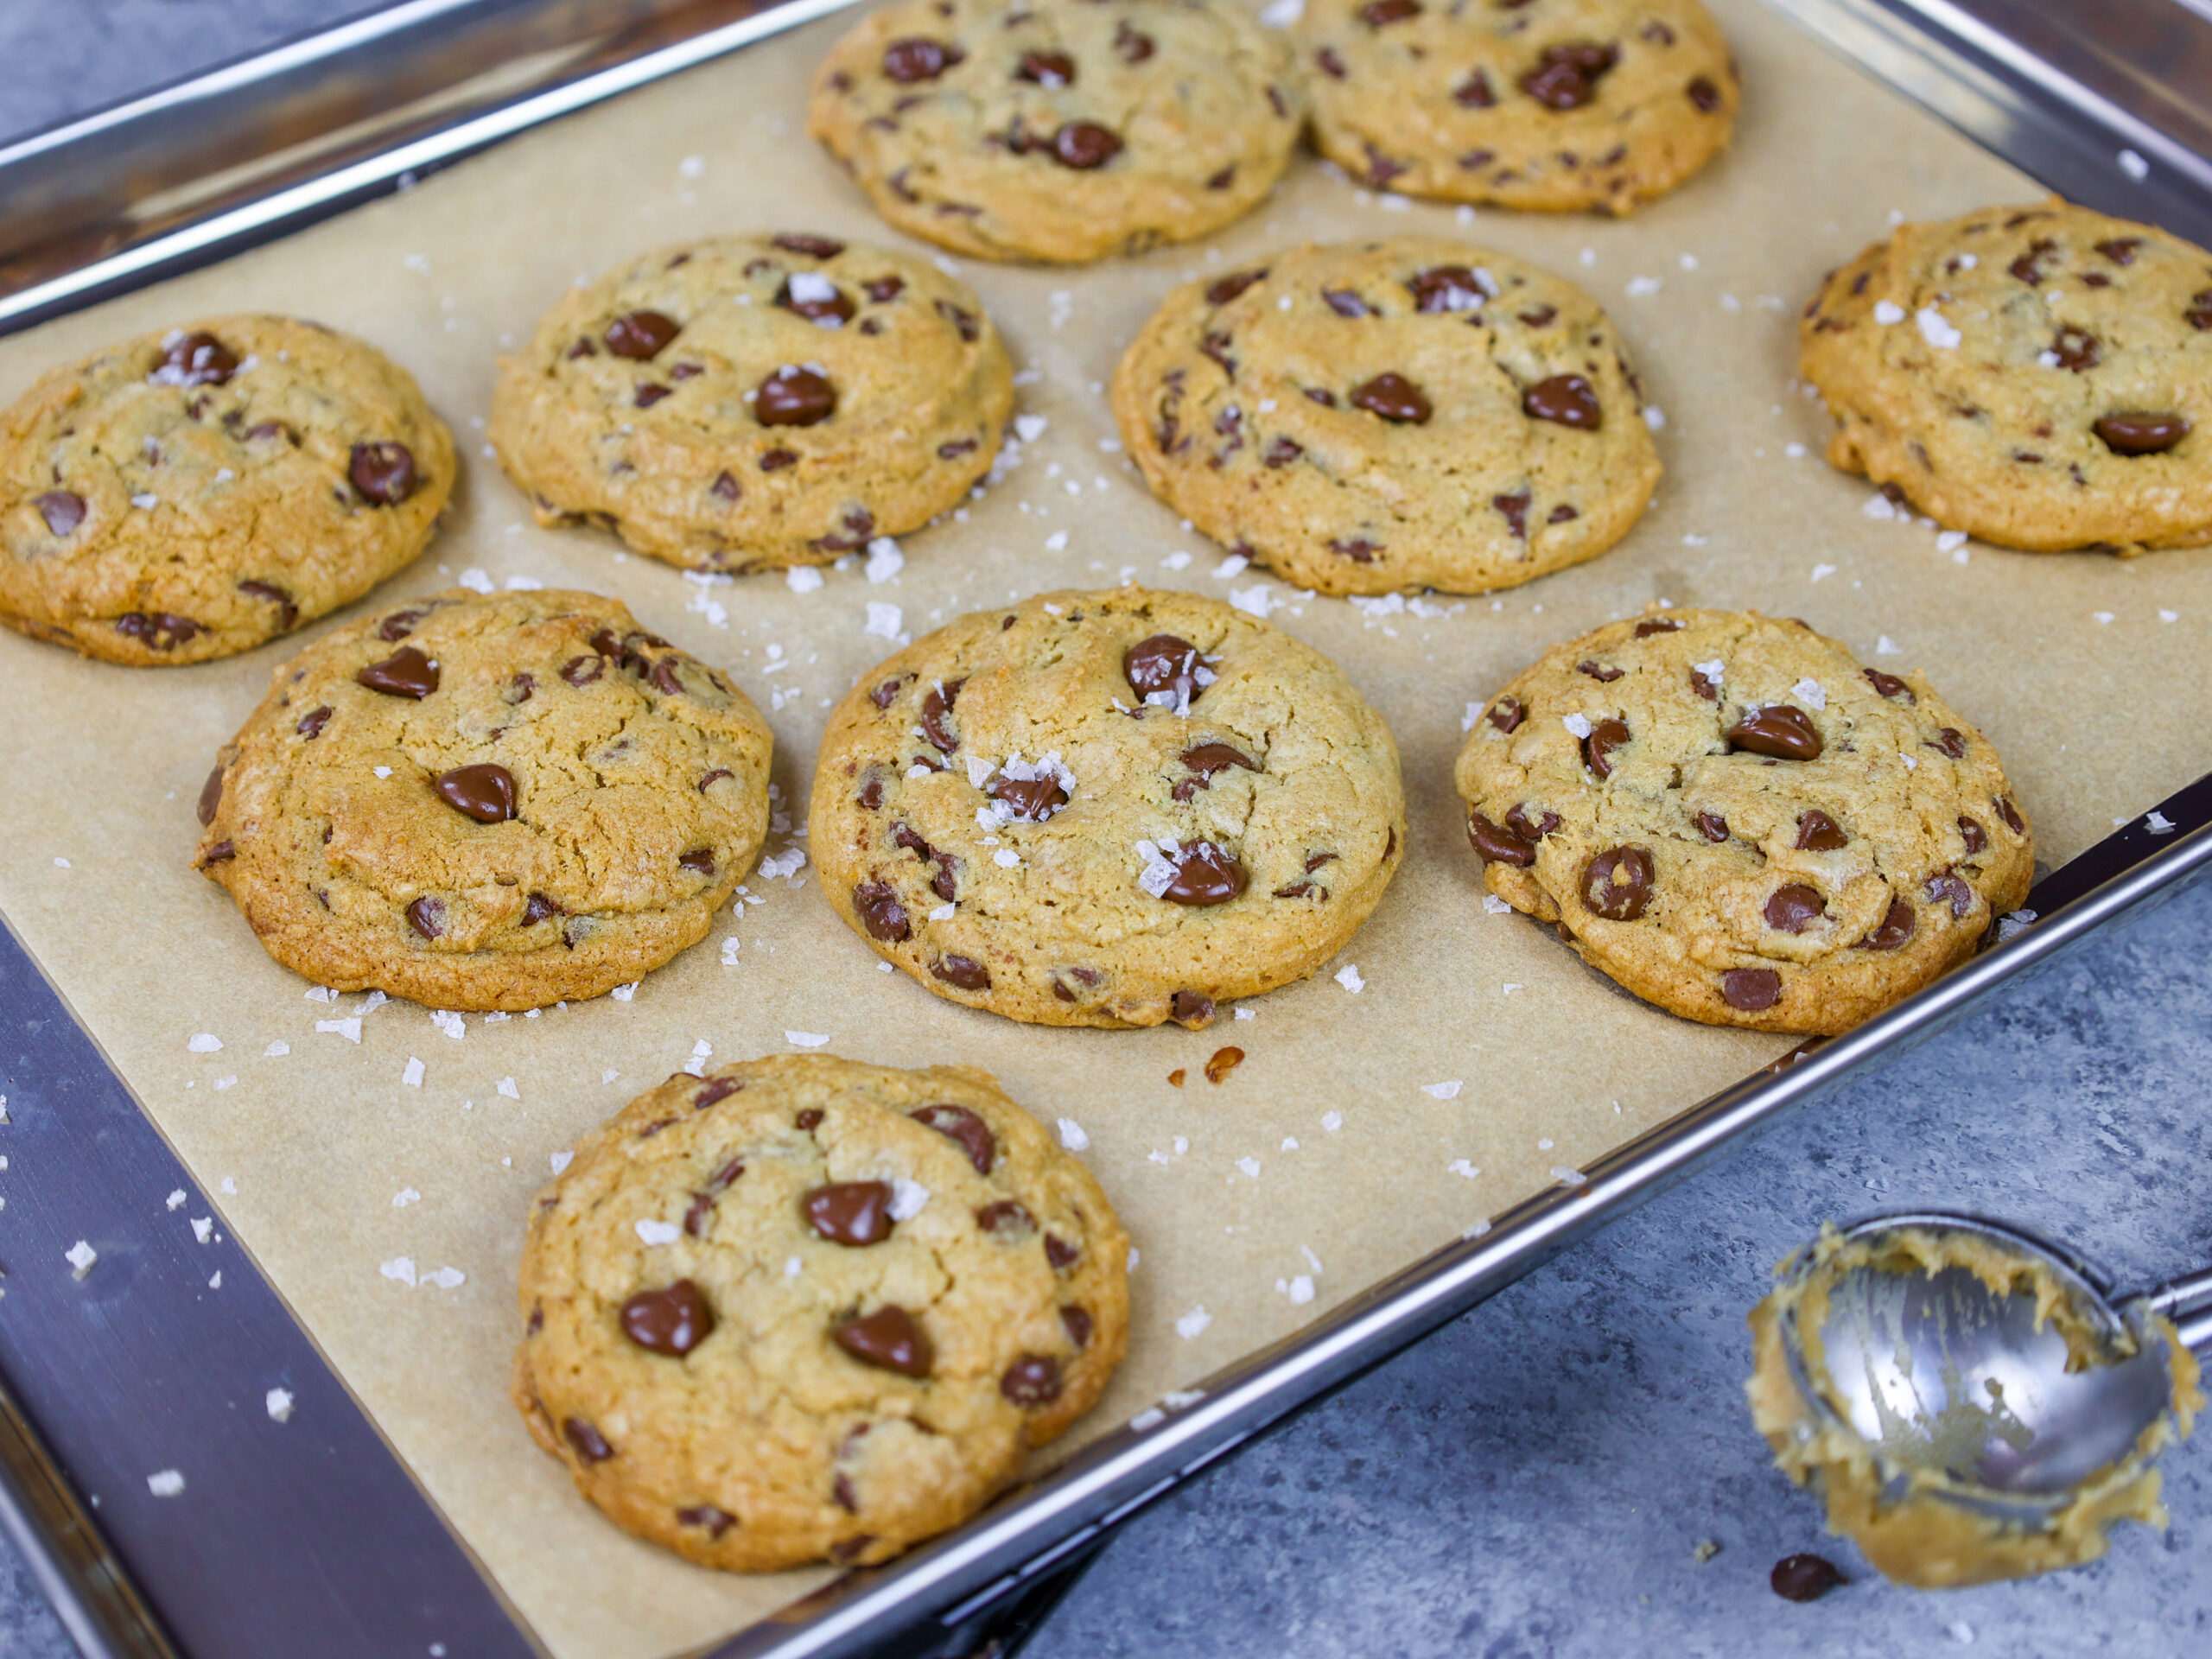 image of cream cheese chocolate chip cookies that have been baked until golden brown and sprinkled with flakey sea salt